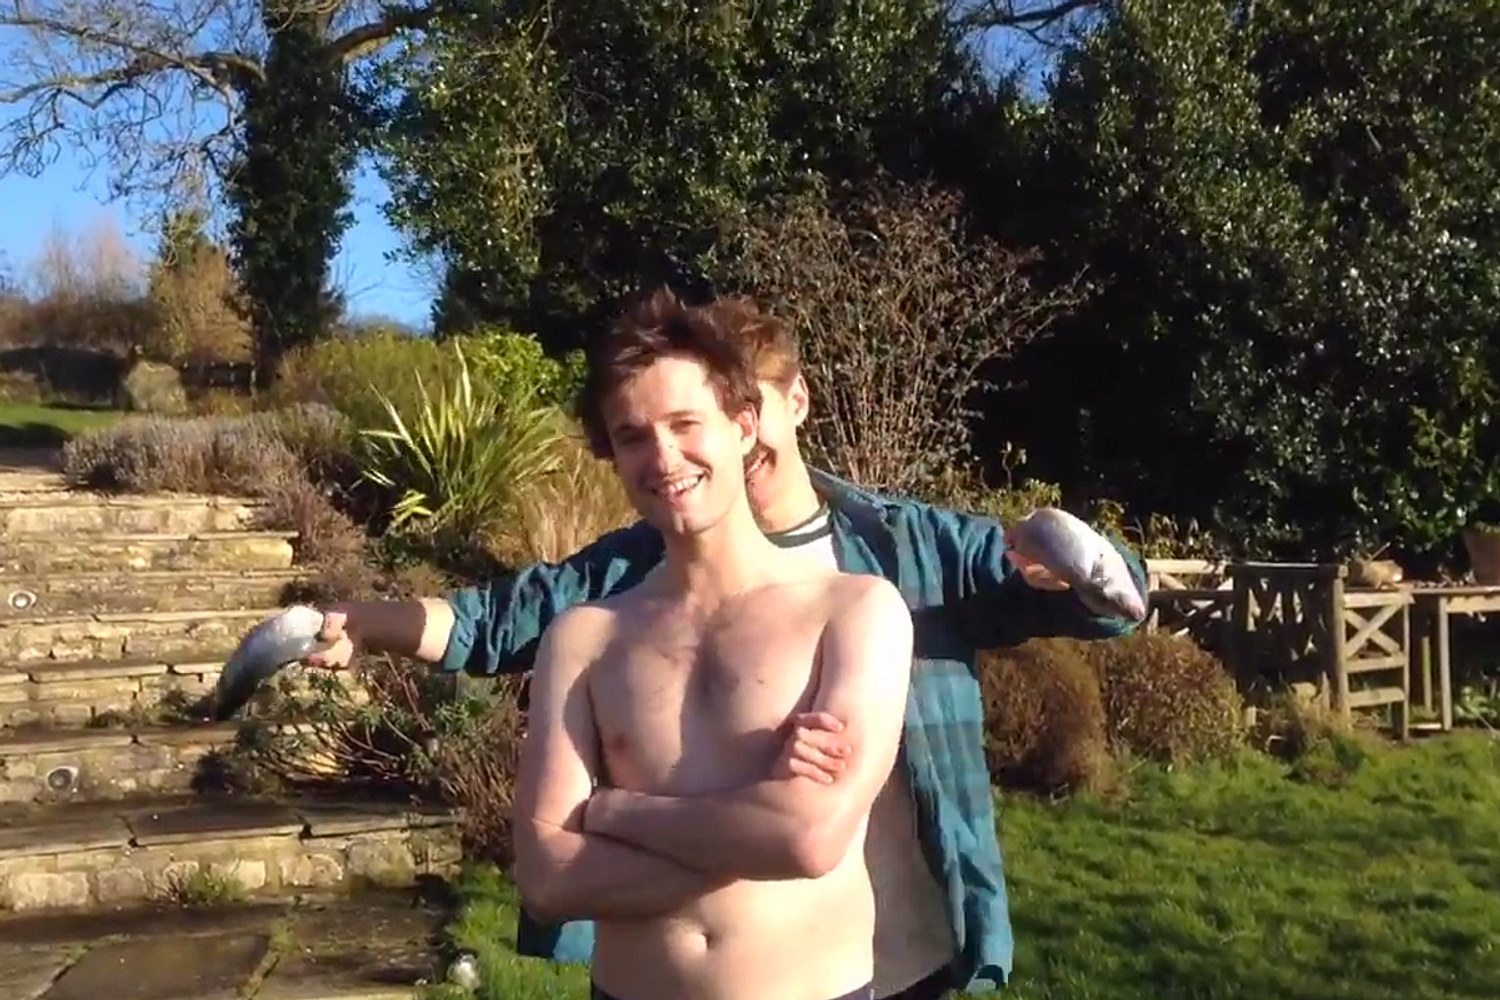 Watch Drew from Glass Animals get slapped with a fish